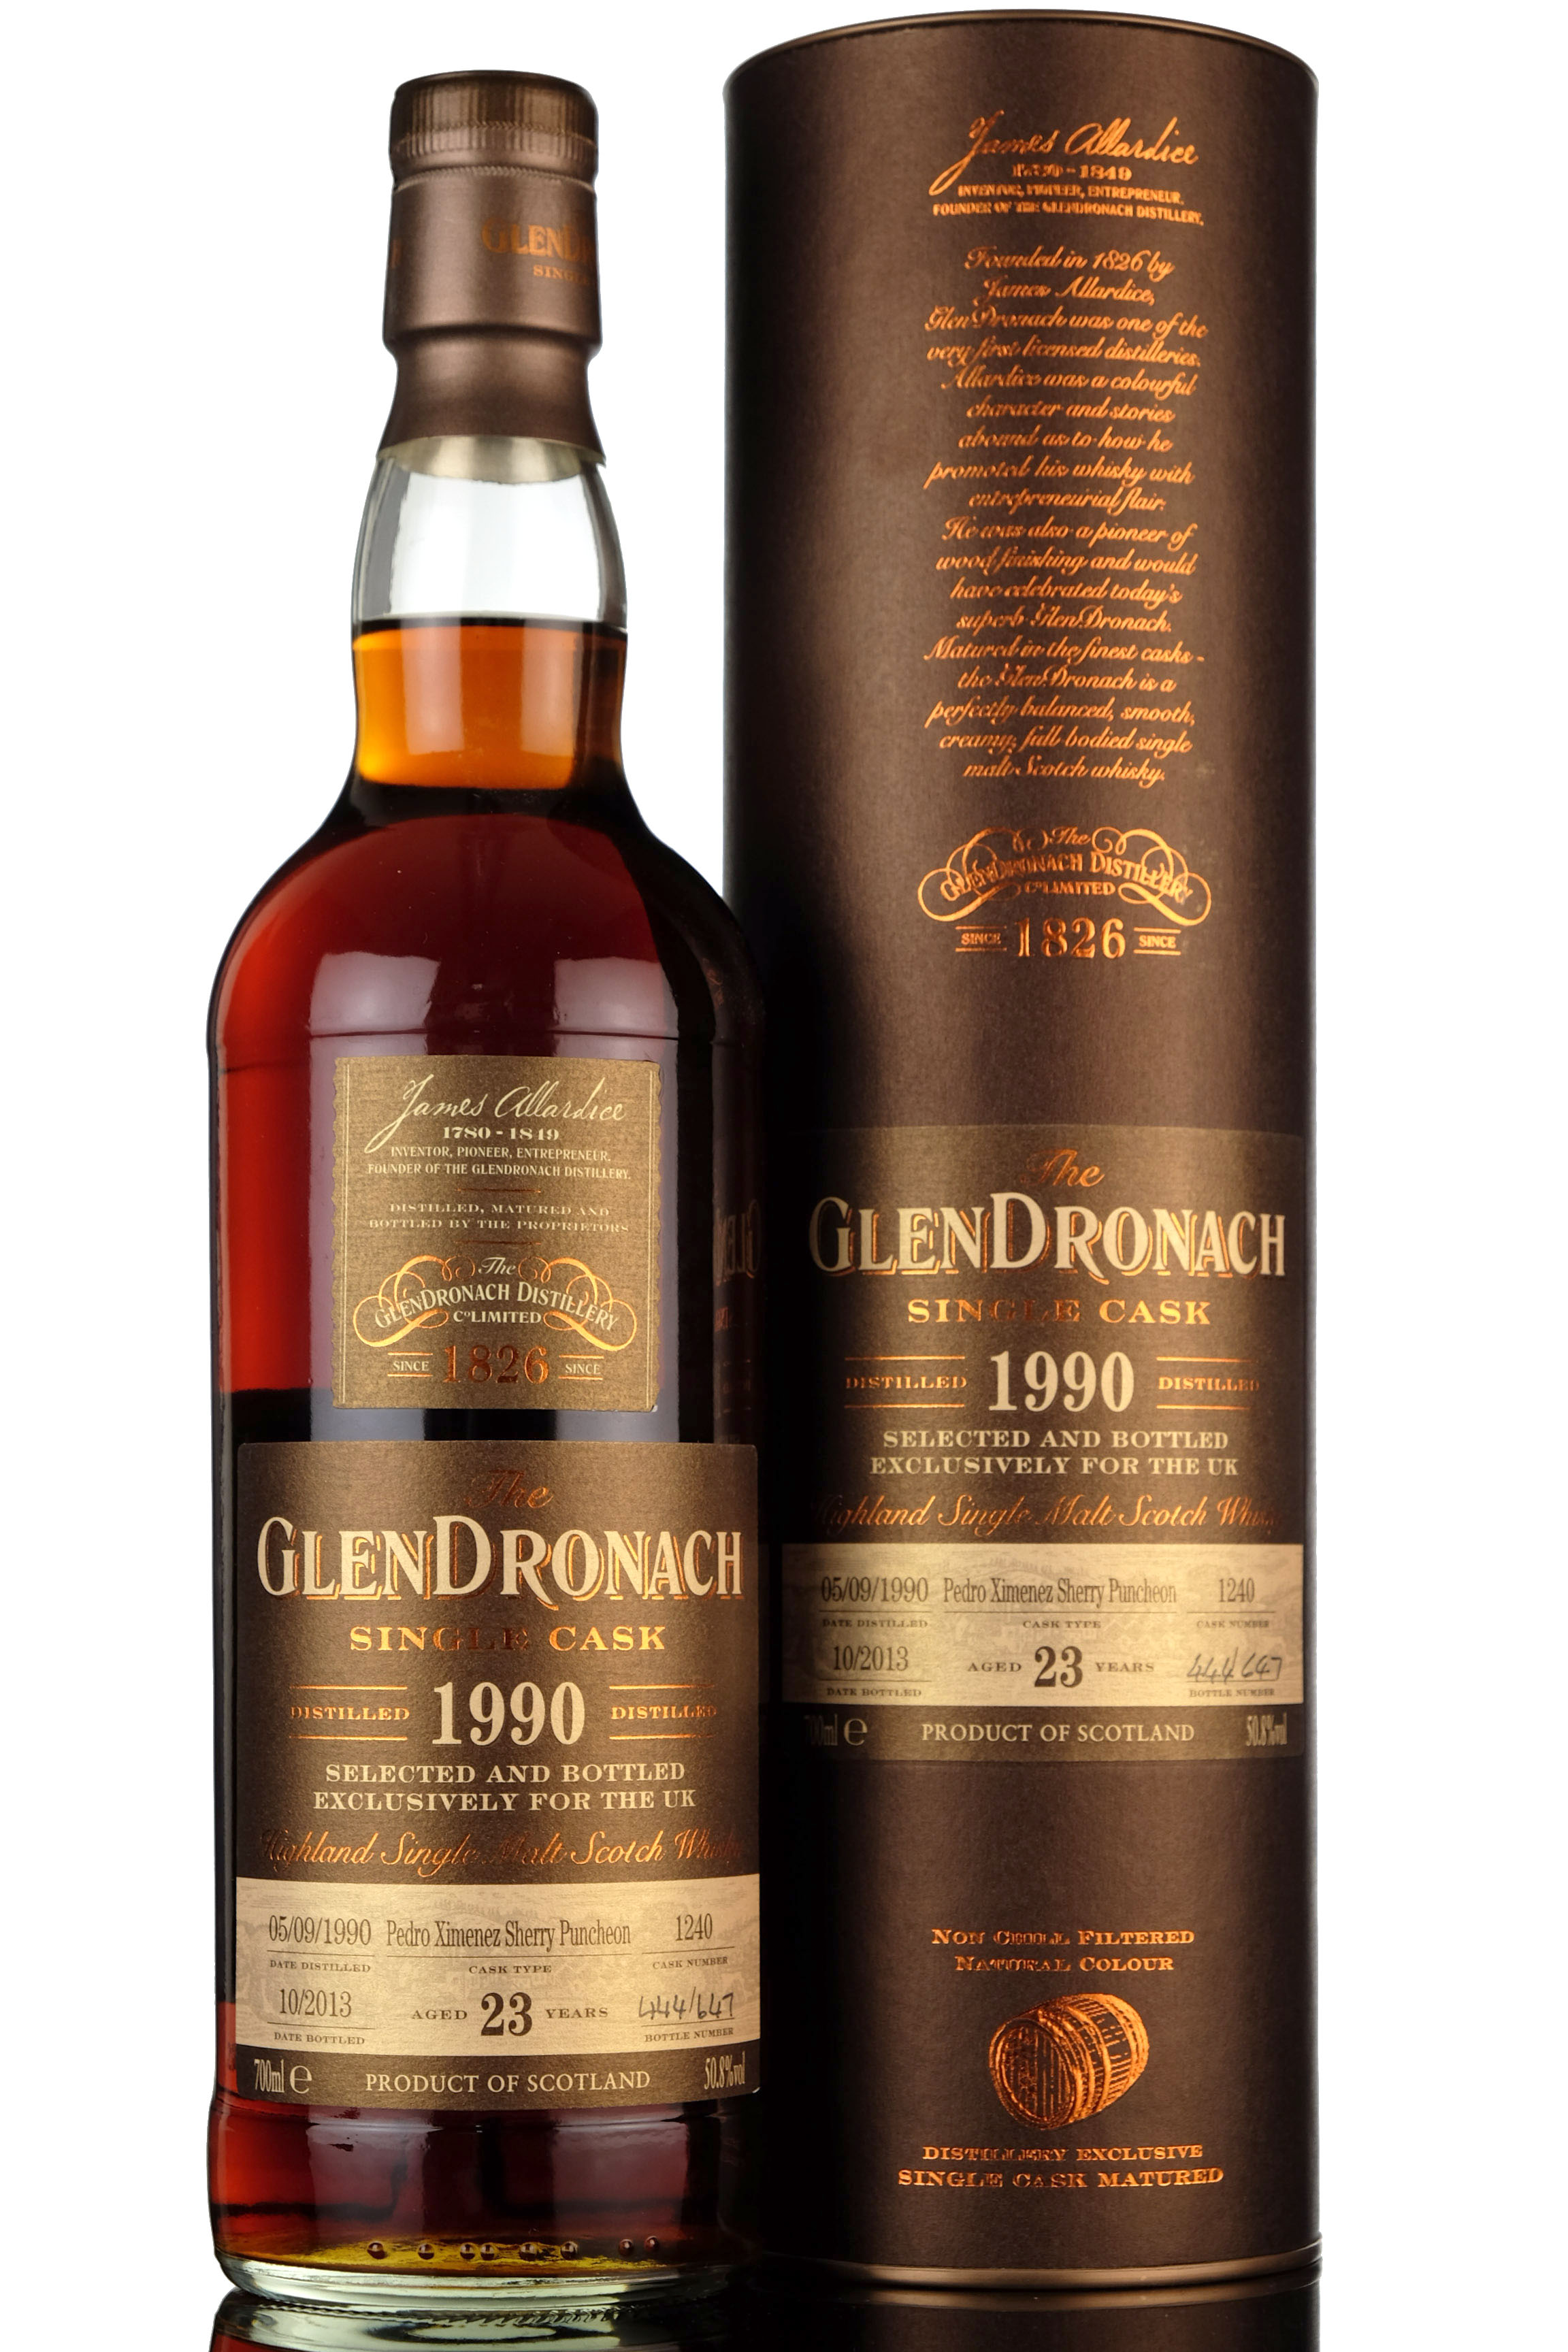 Glendronach 1990-2013 - 23 Year Old - Single Cask 1240 - UK Exclusive